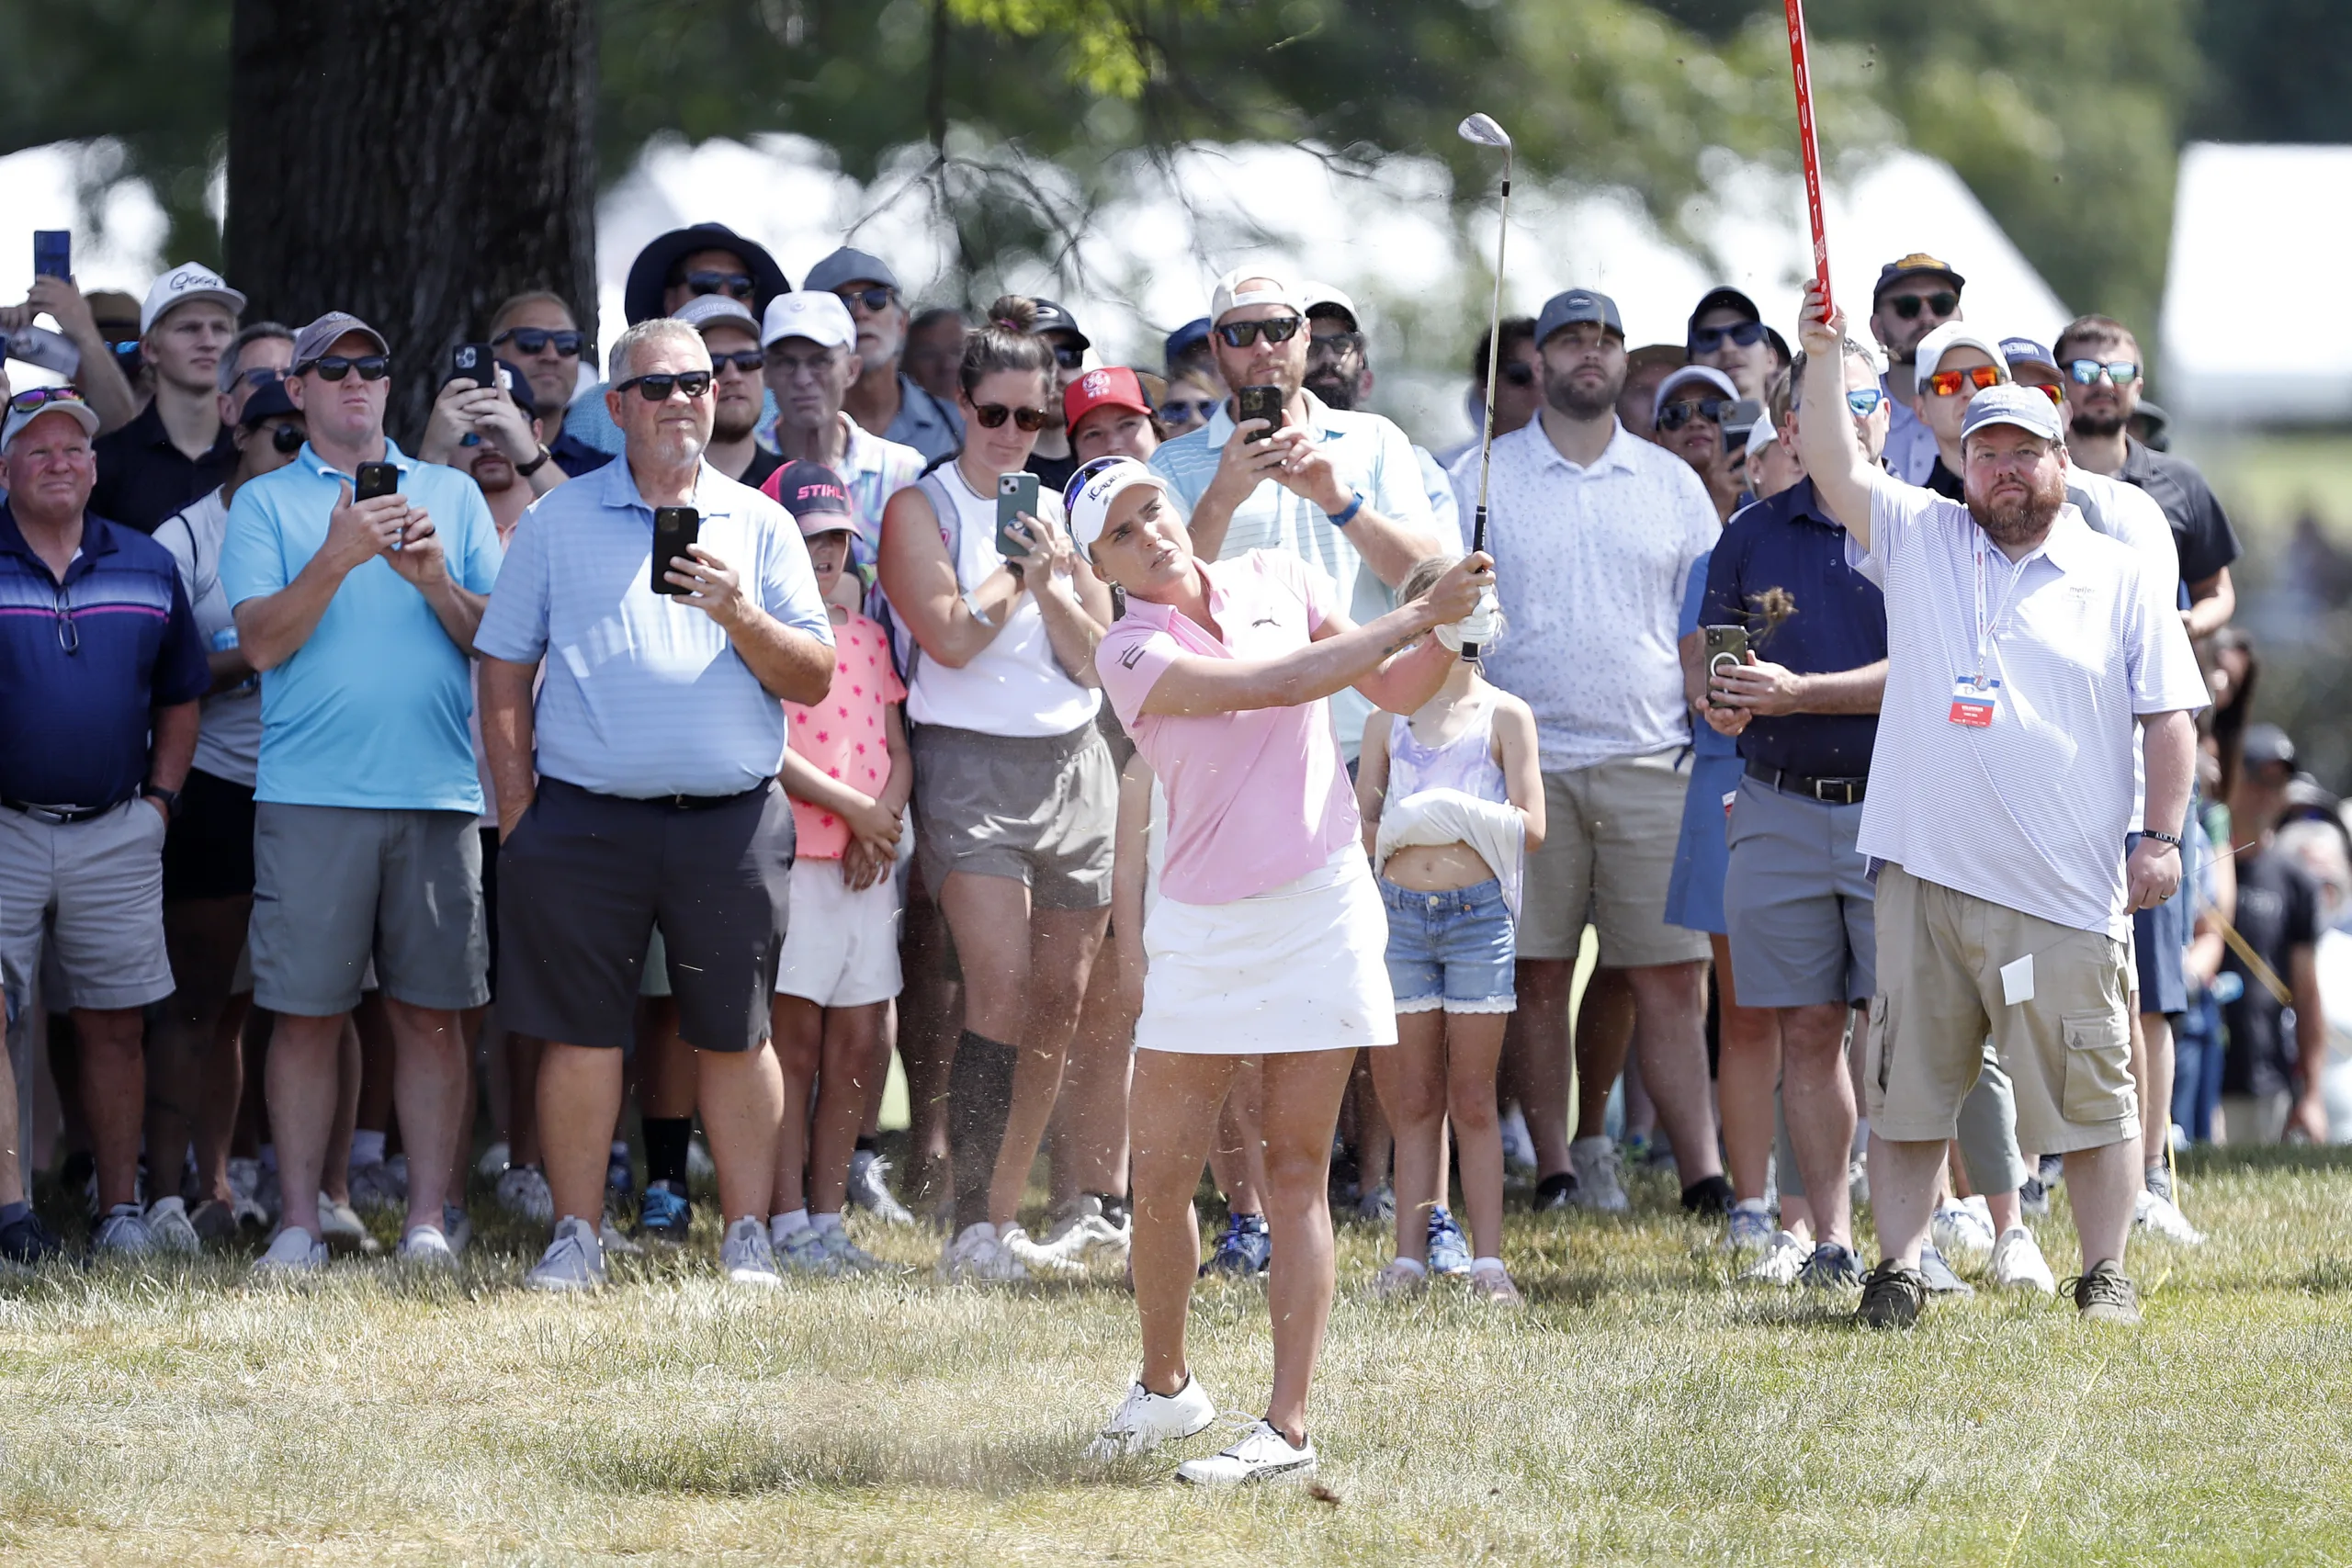 LPGA’s Lexi Thompson goes 7 under in 6-hole stretch at Meijer Classic